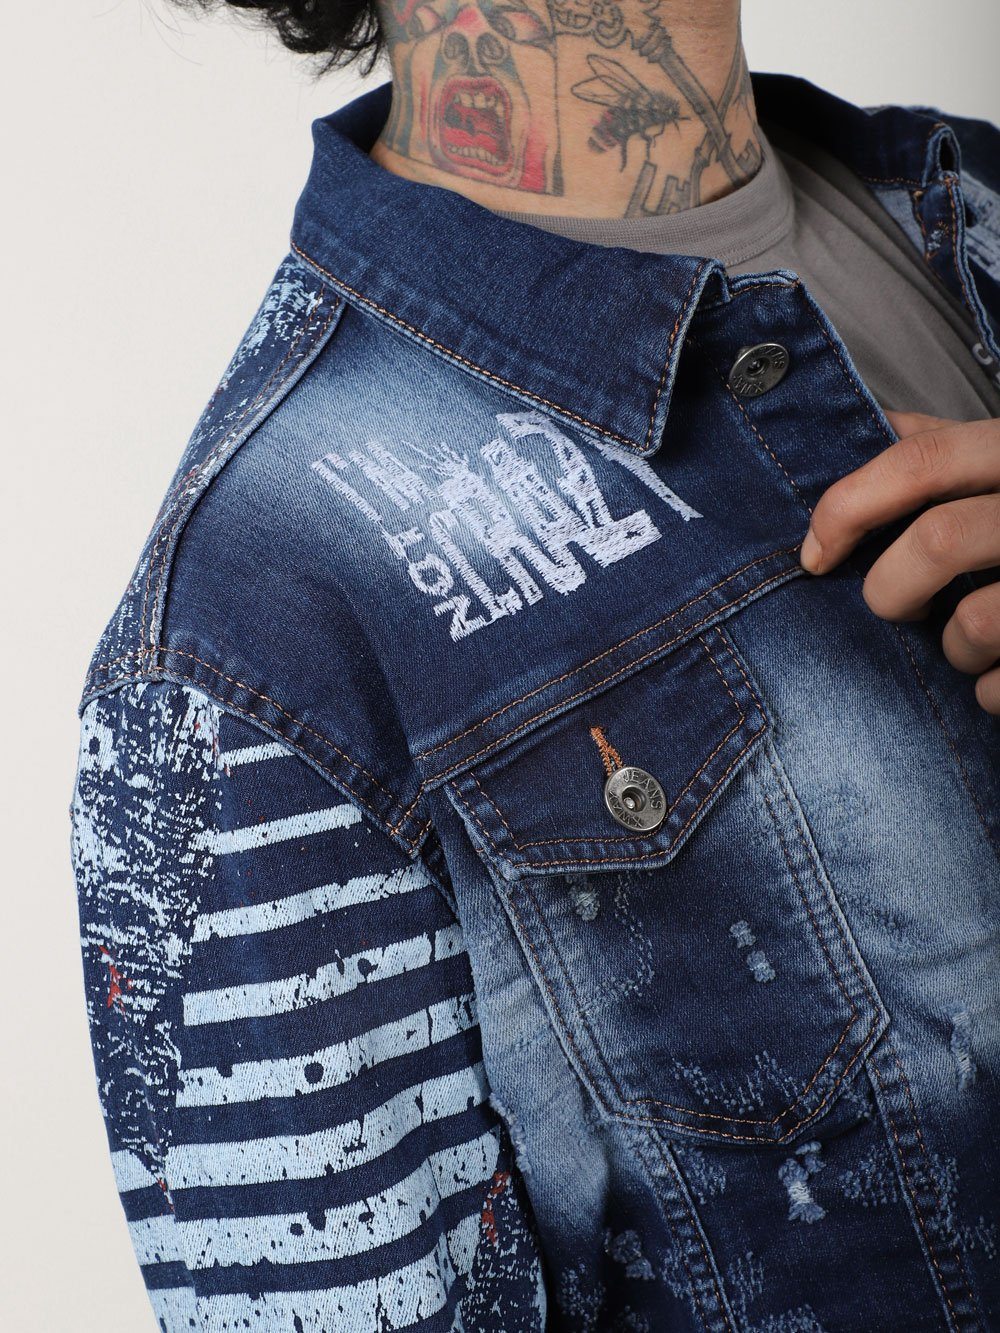 A man wearing a CRAZY CAT denim jacket with tattoos.